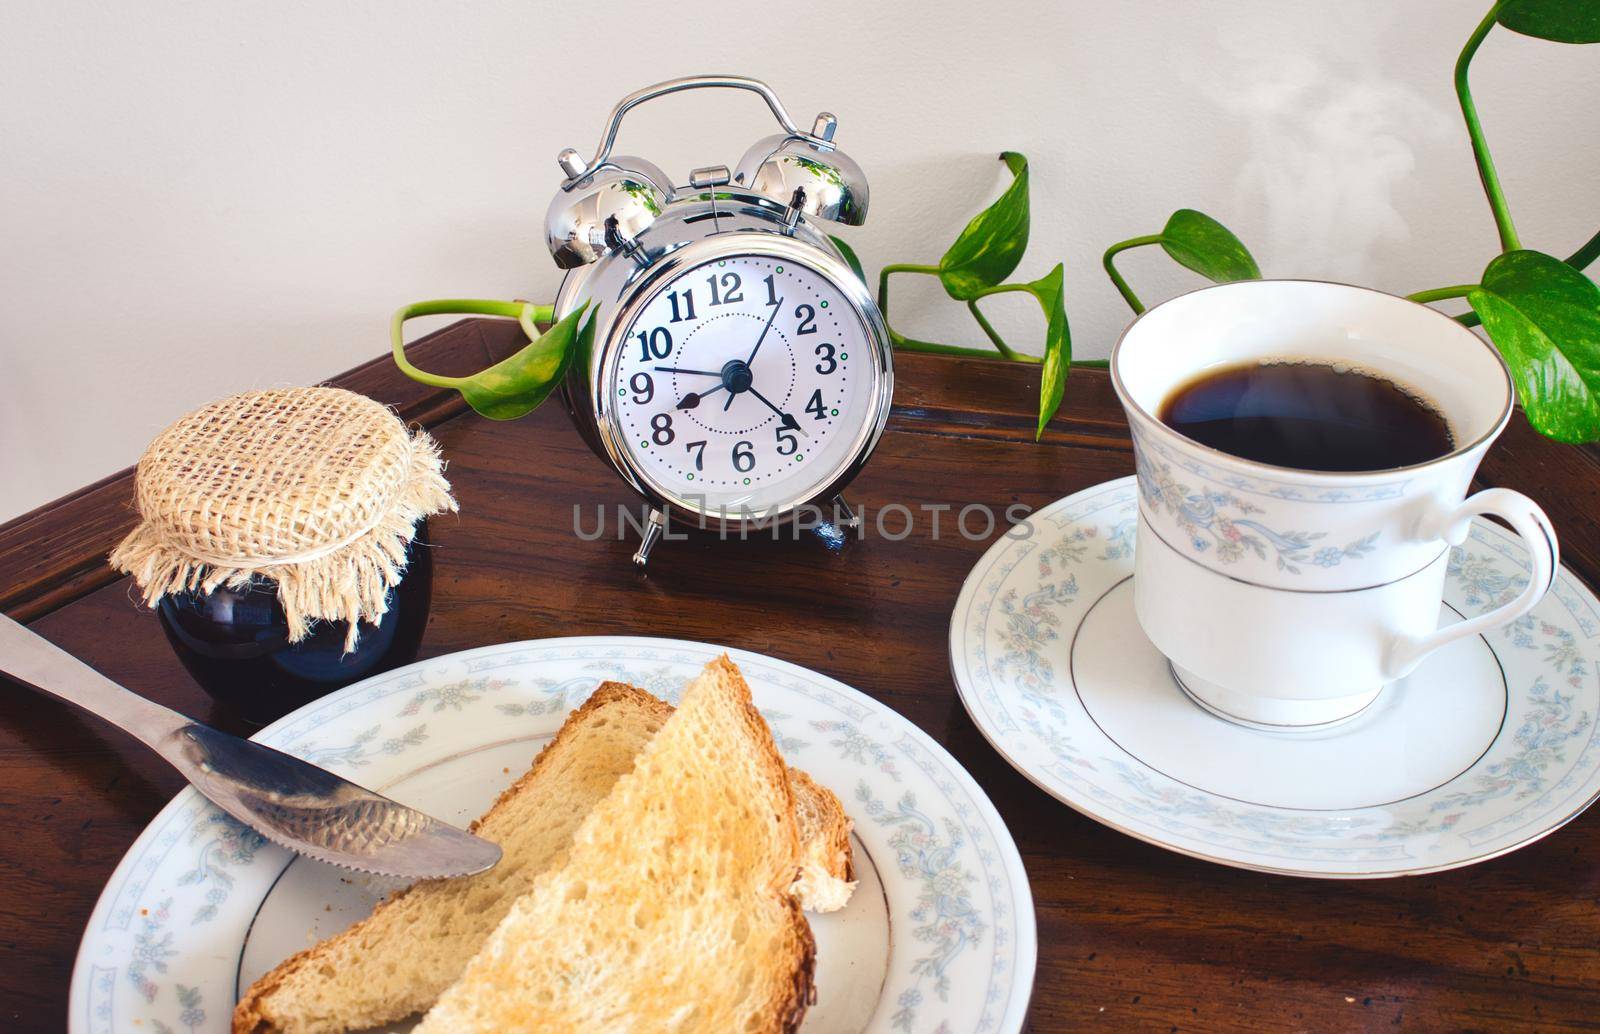 Breakfast table with tea or coffee in a dainty cup and saucer with slices of toast and a pot of jam and a retro alarm clock